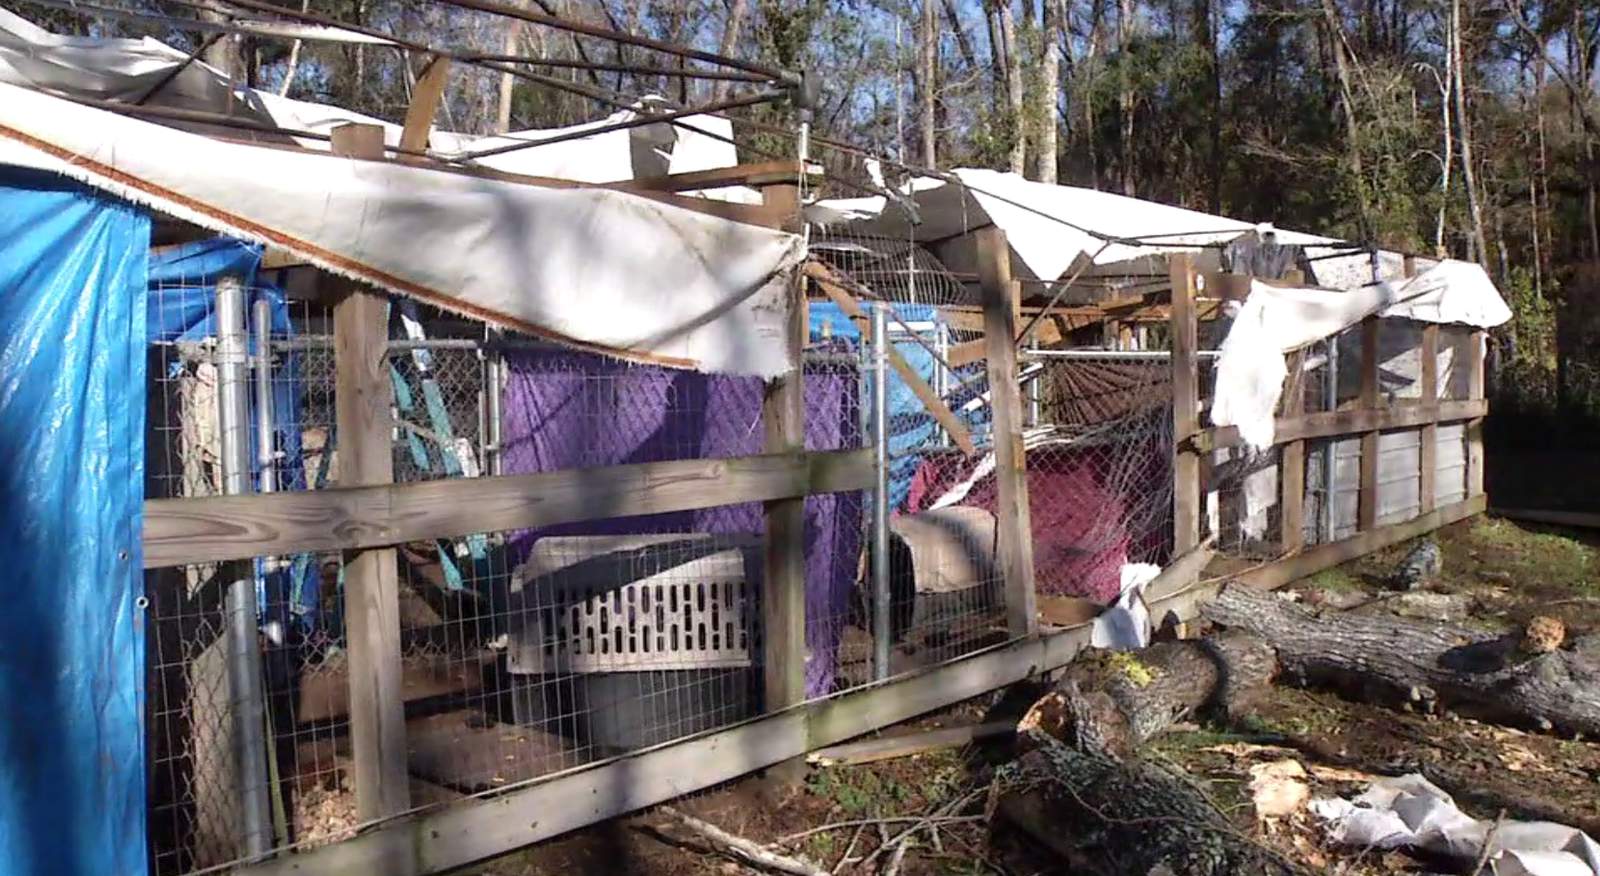 Sanctuary for rescued dogs in need of help after tree falls on kennels